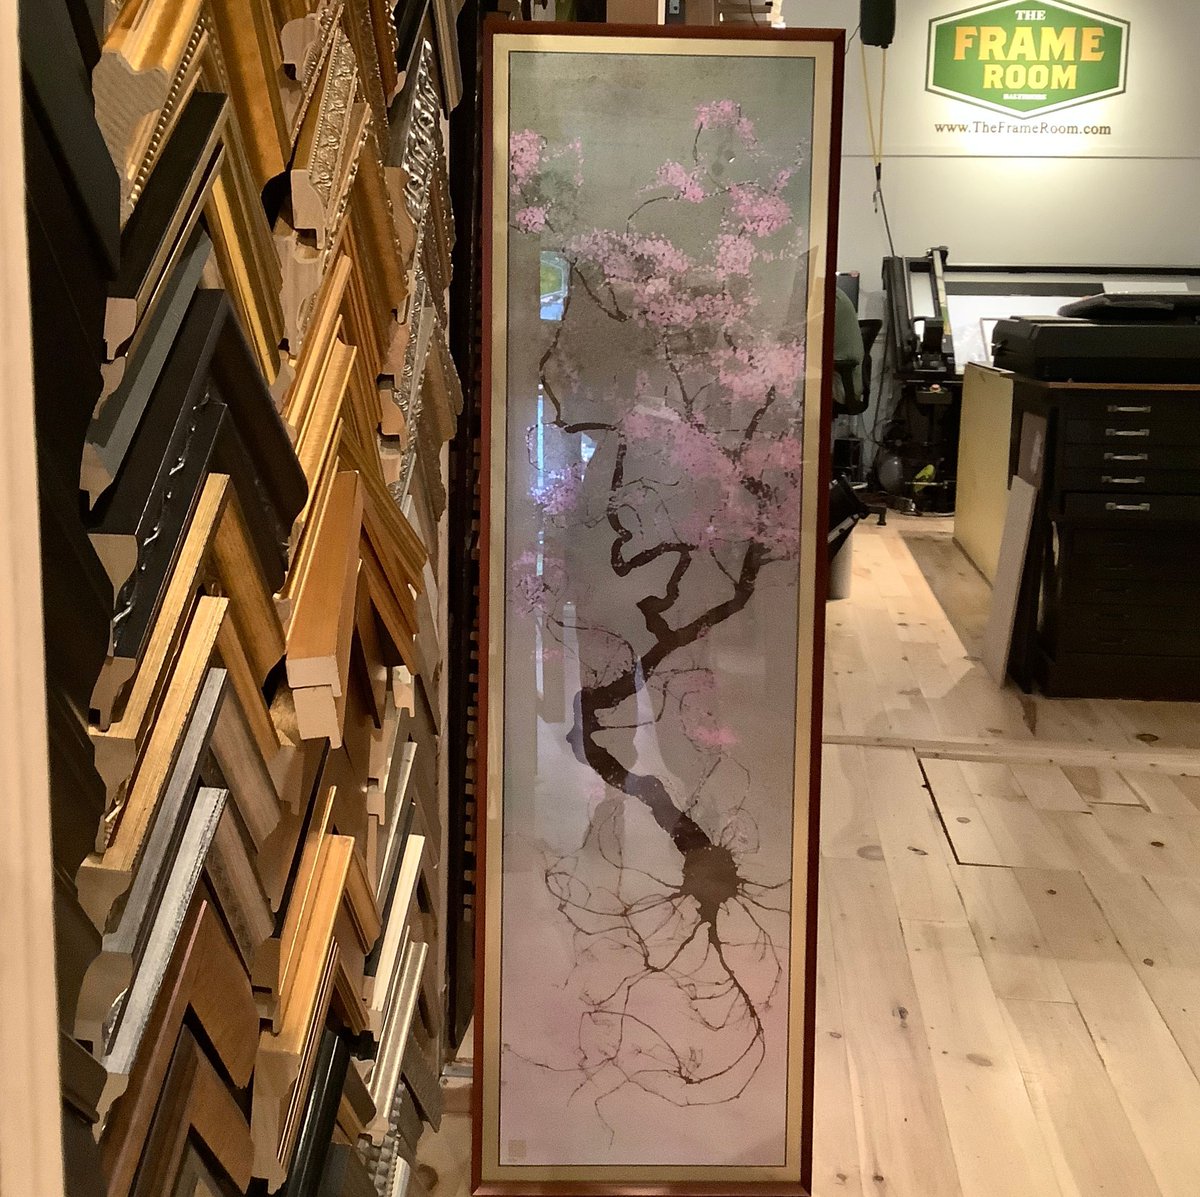 Nature mirrors shapes throughout everything, from neurons to trees.

#theframeroom #customframes #customframing #customframer #customframeshop #frameshop #fellspoint #baltimore #neuron #cherry #blossom #tree